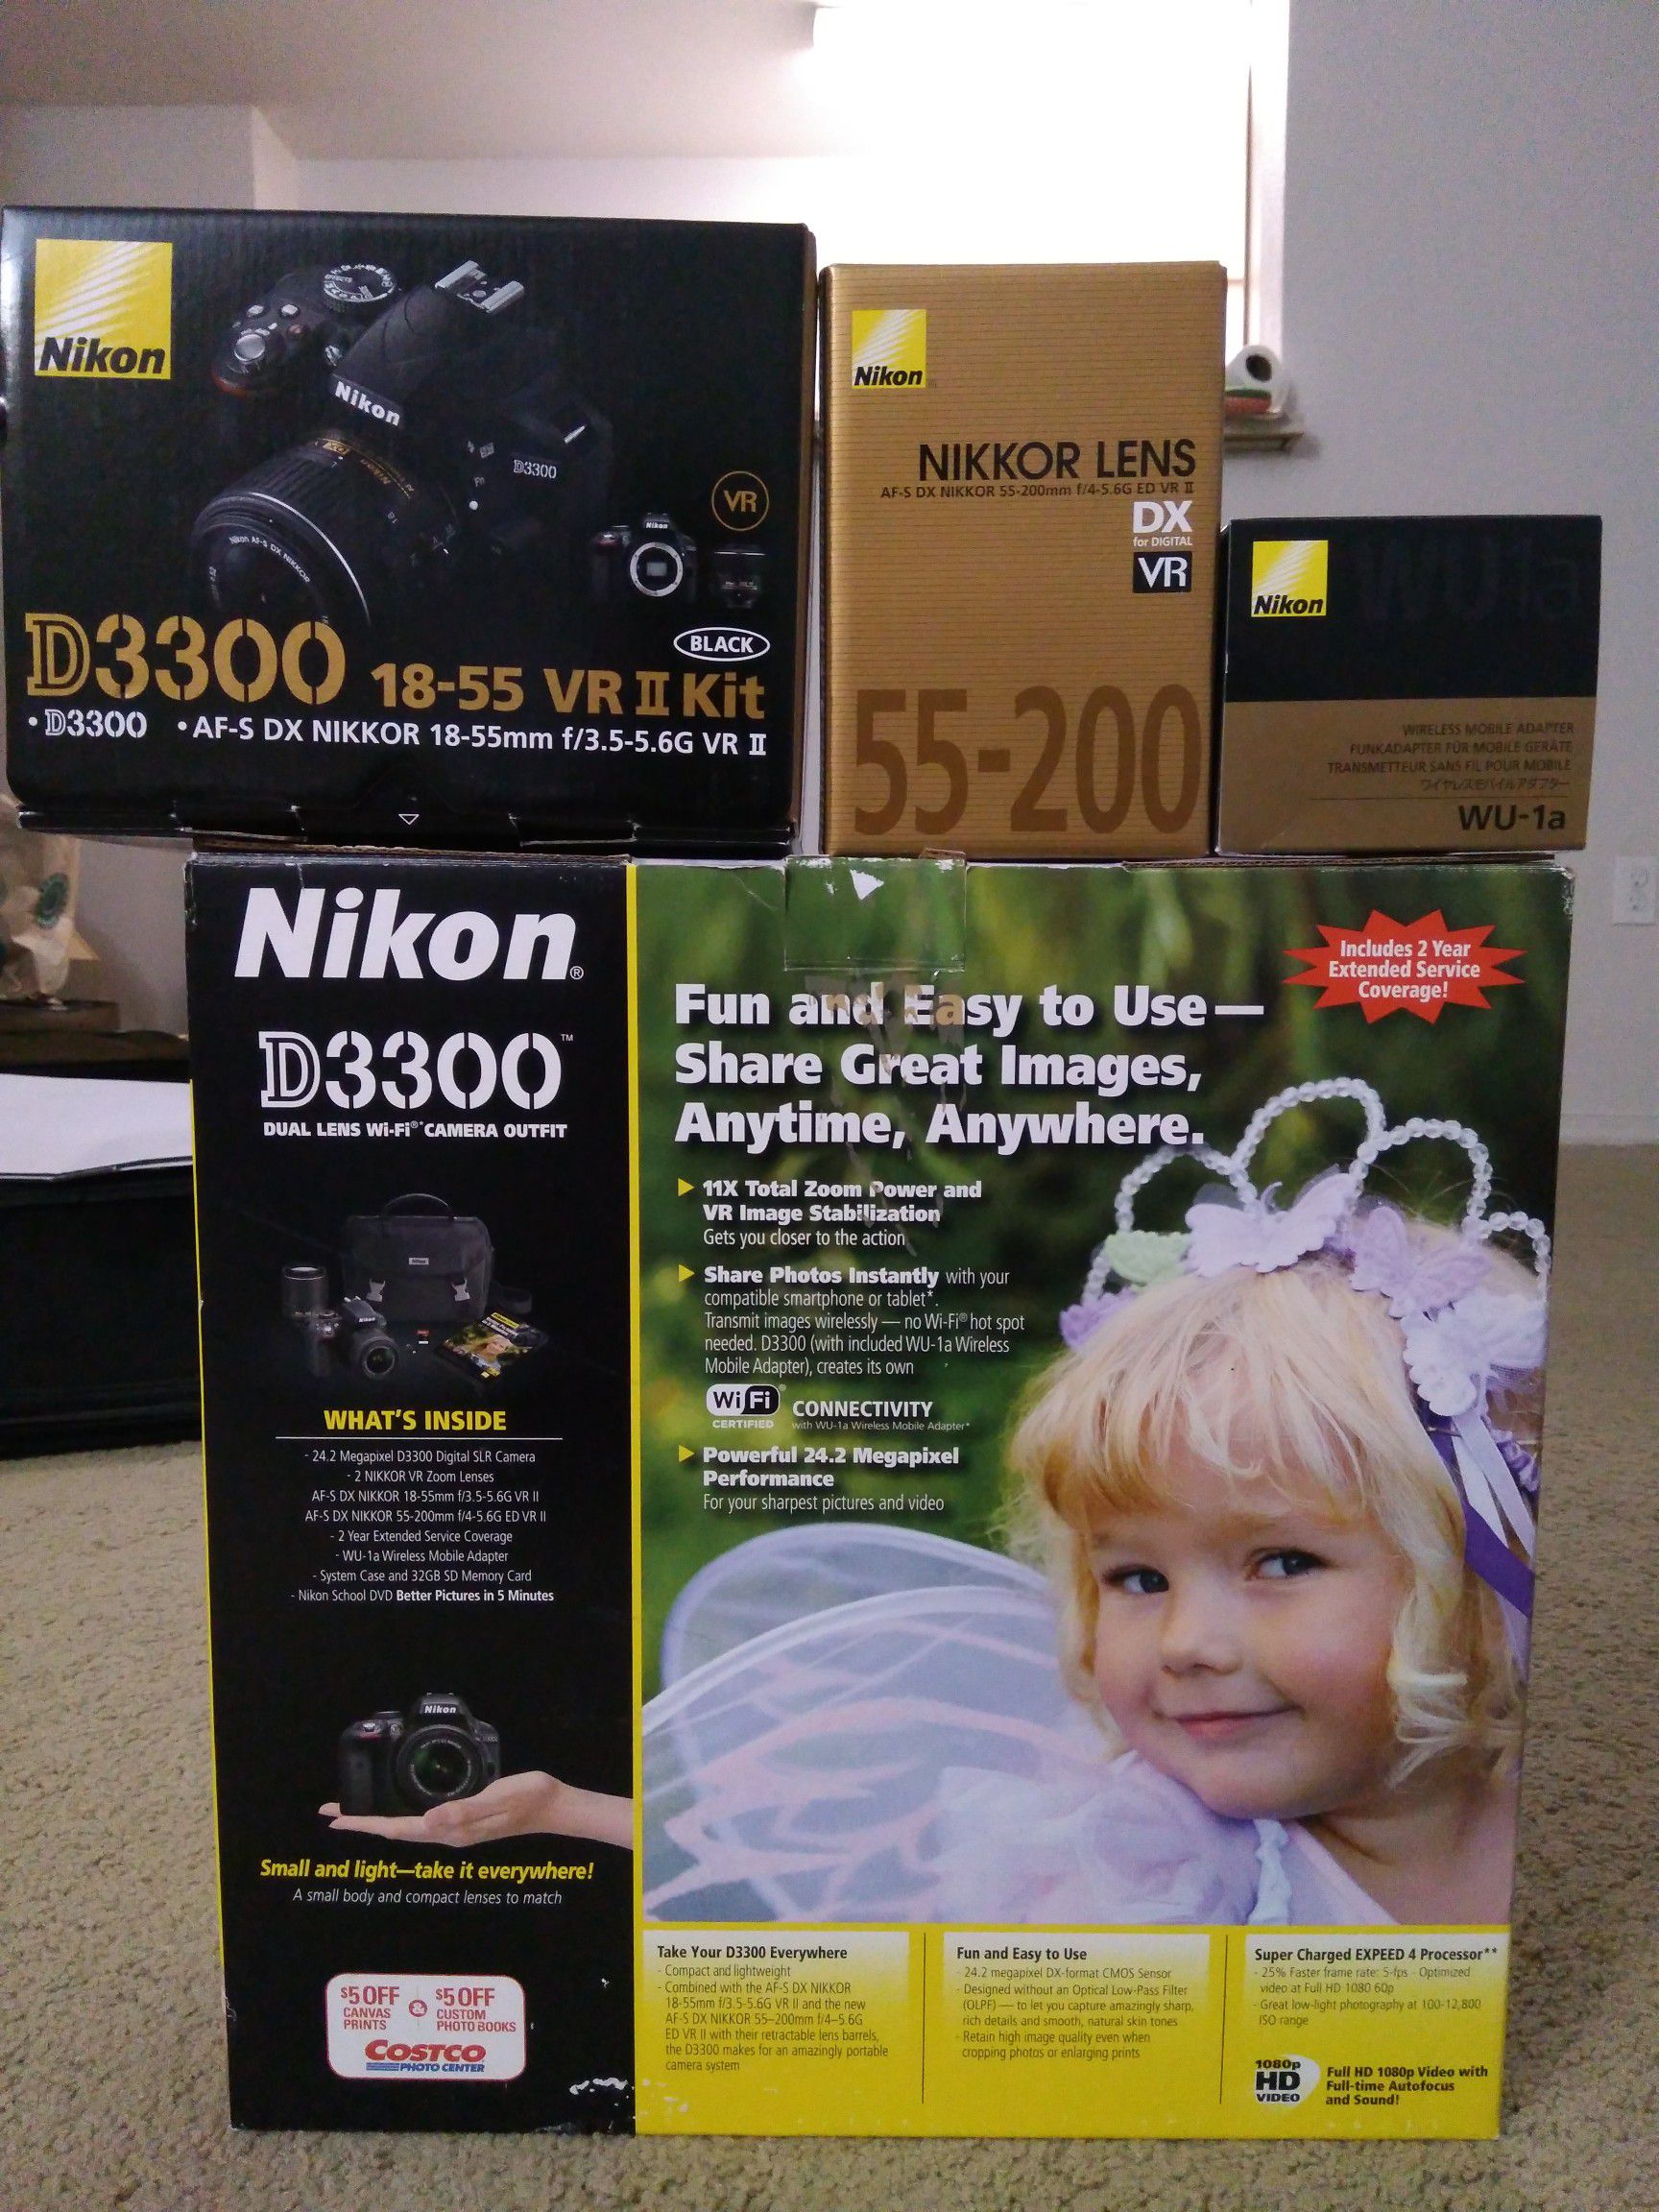 Nikon D3300 empty box only, camera or accessories Sale in Hillsboro, - OfferUp